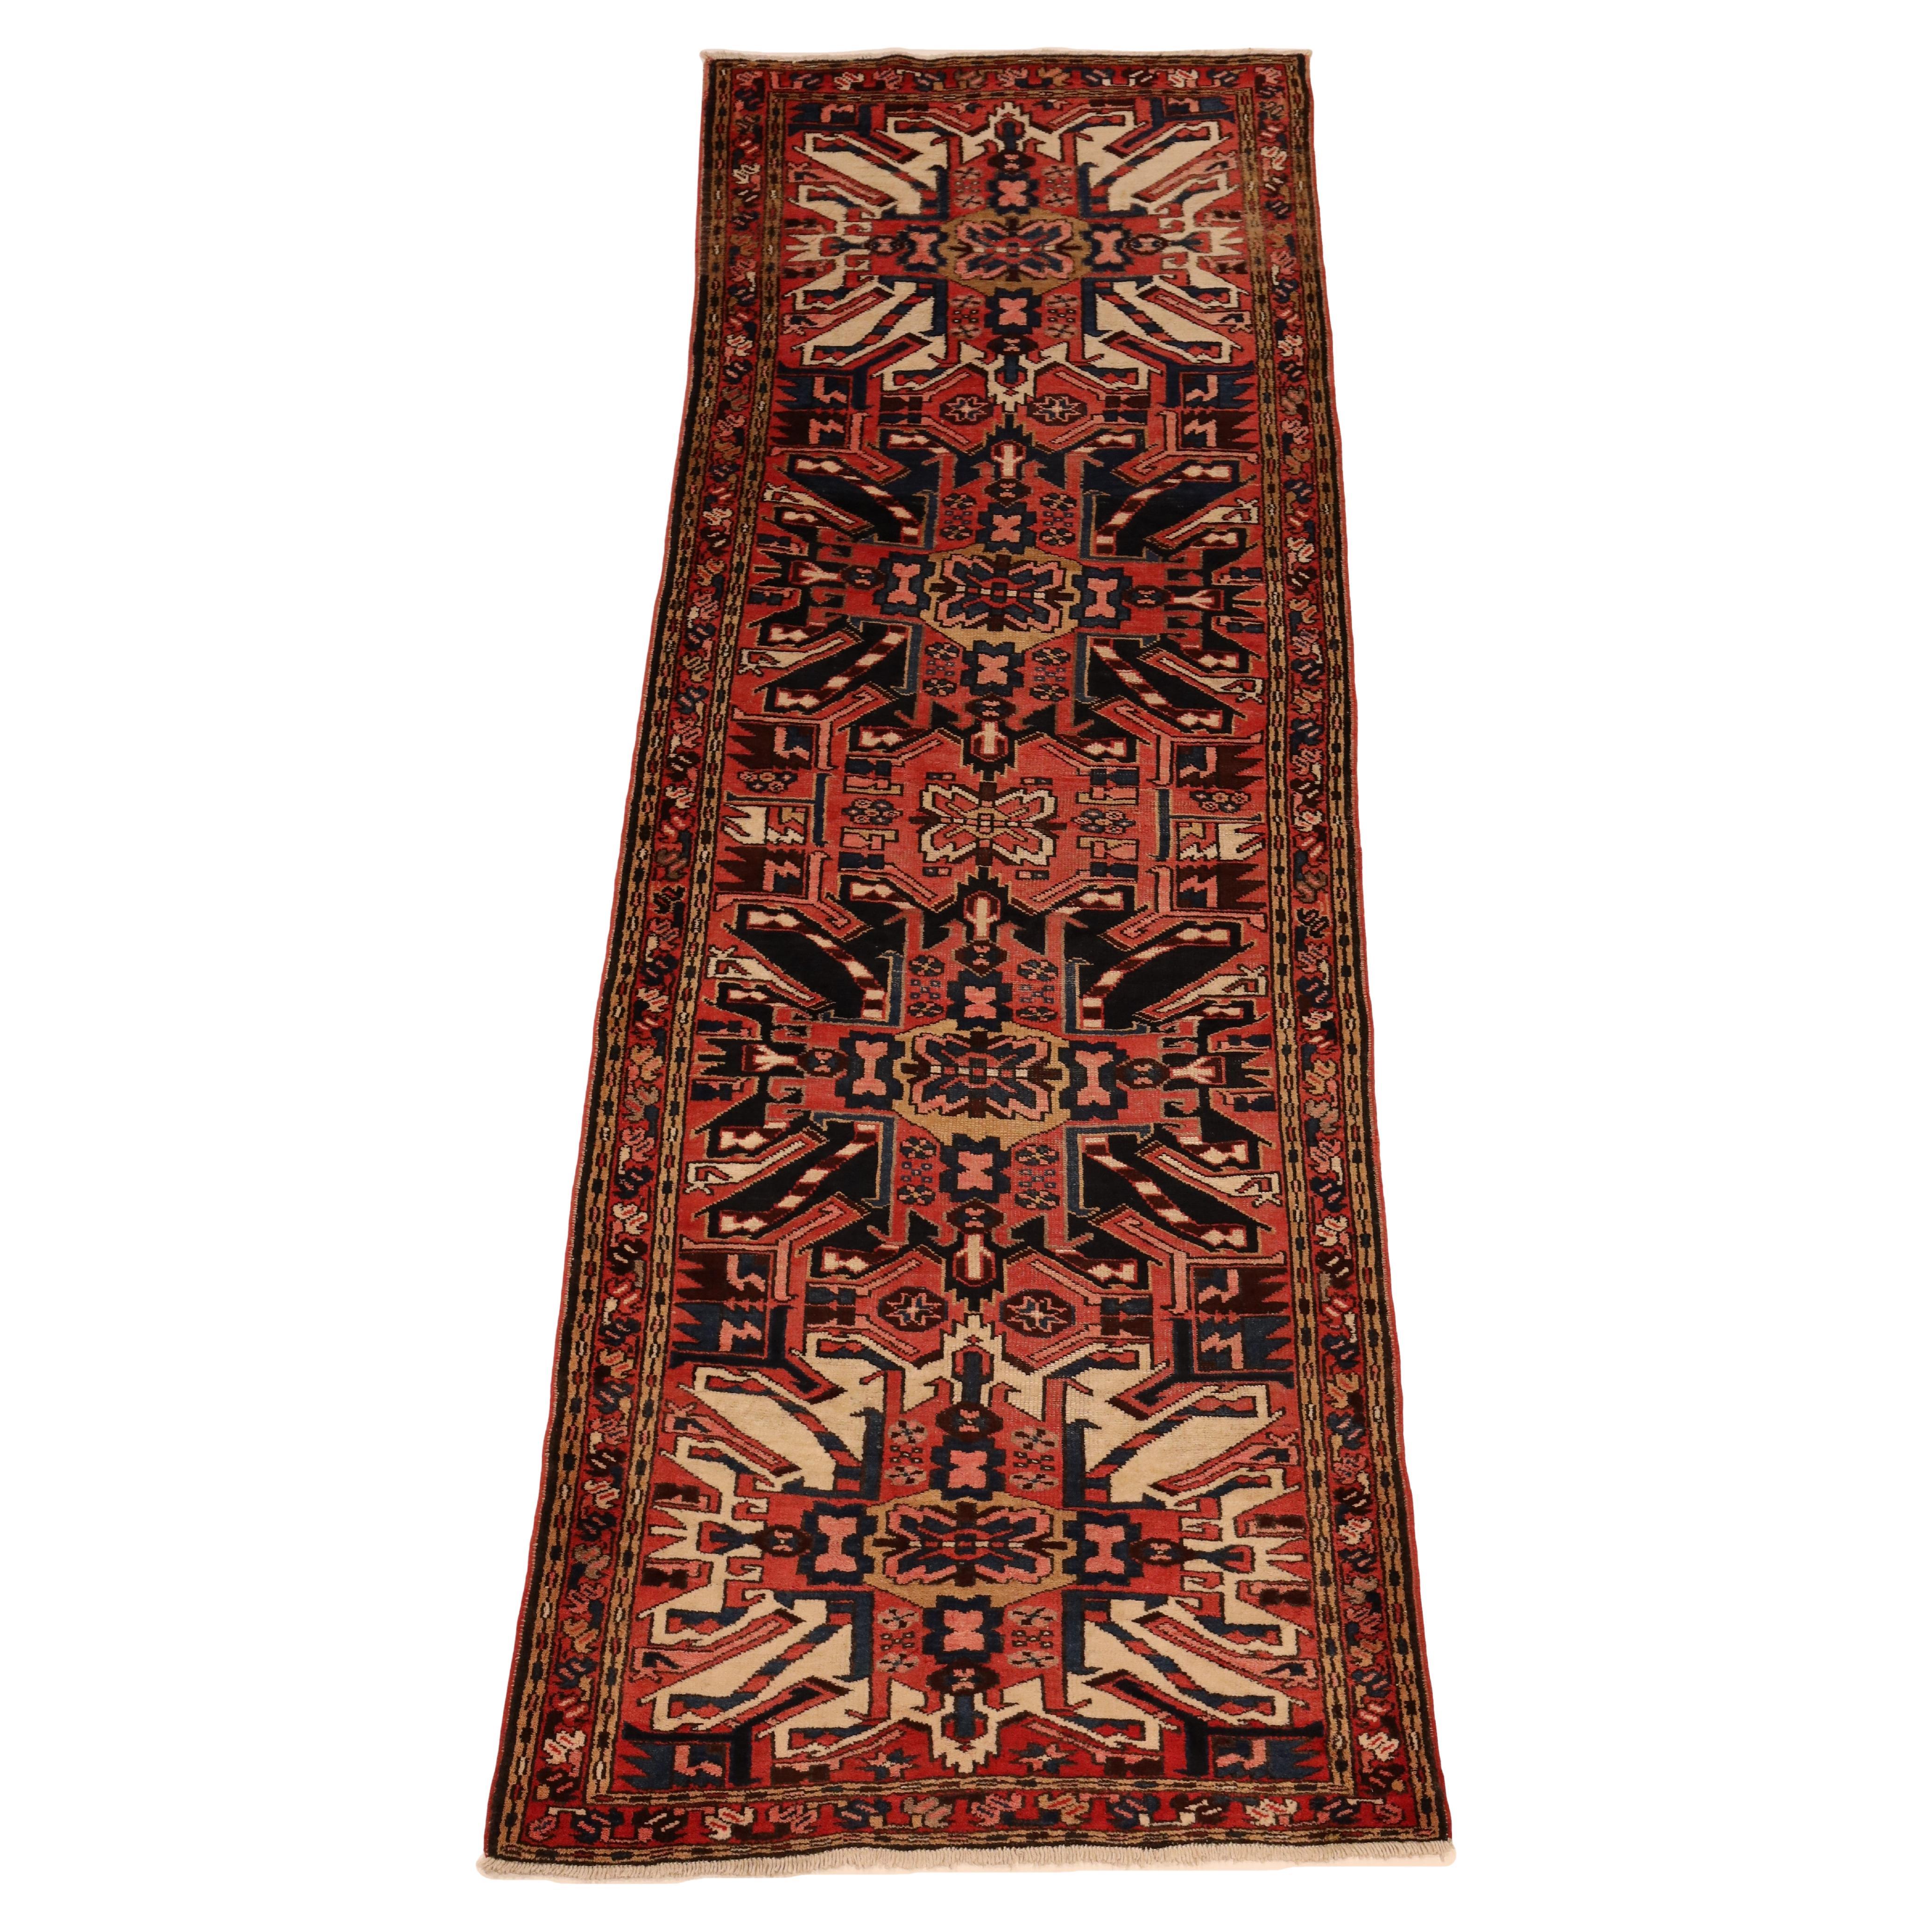 North-West Persian Runner - 3'5" x 10'6" For Sale